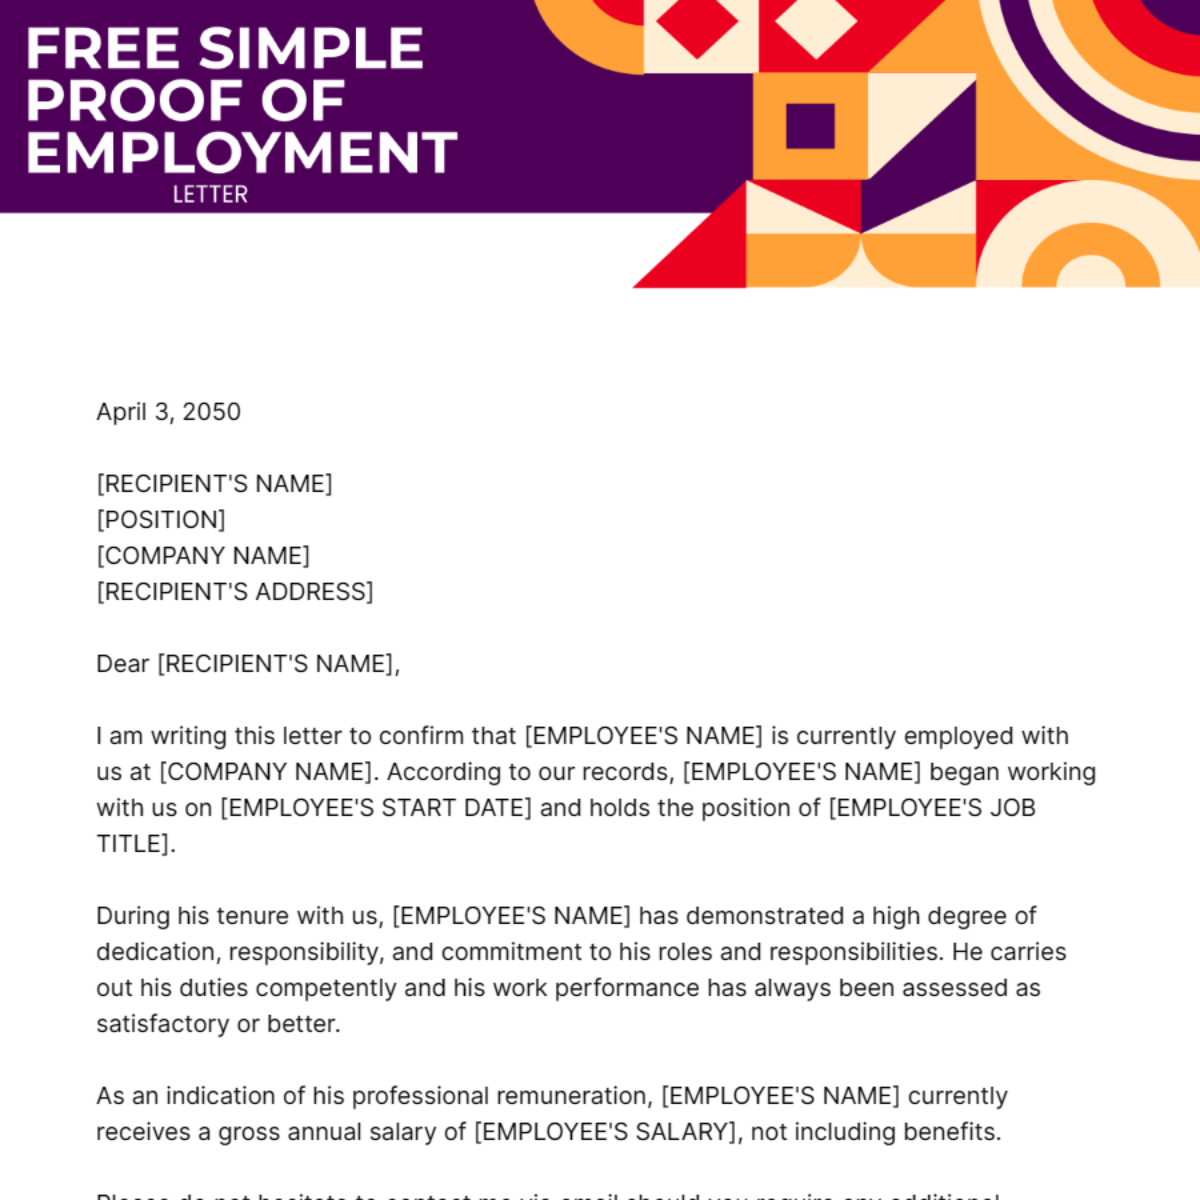 Simple Proof of Employment Letter Template